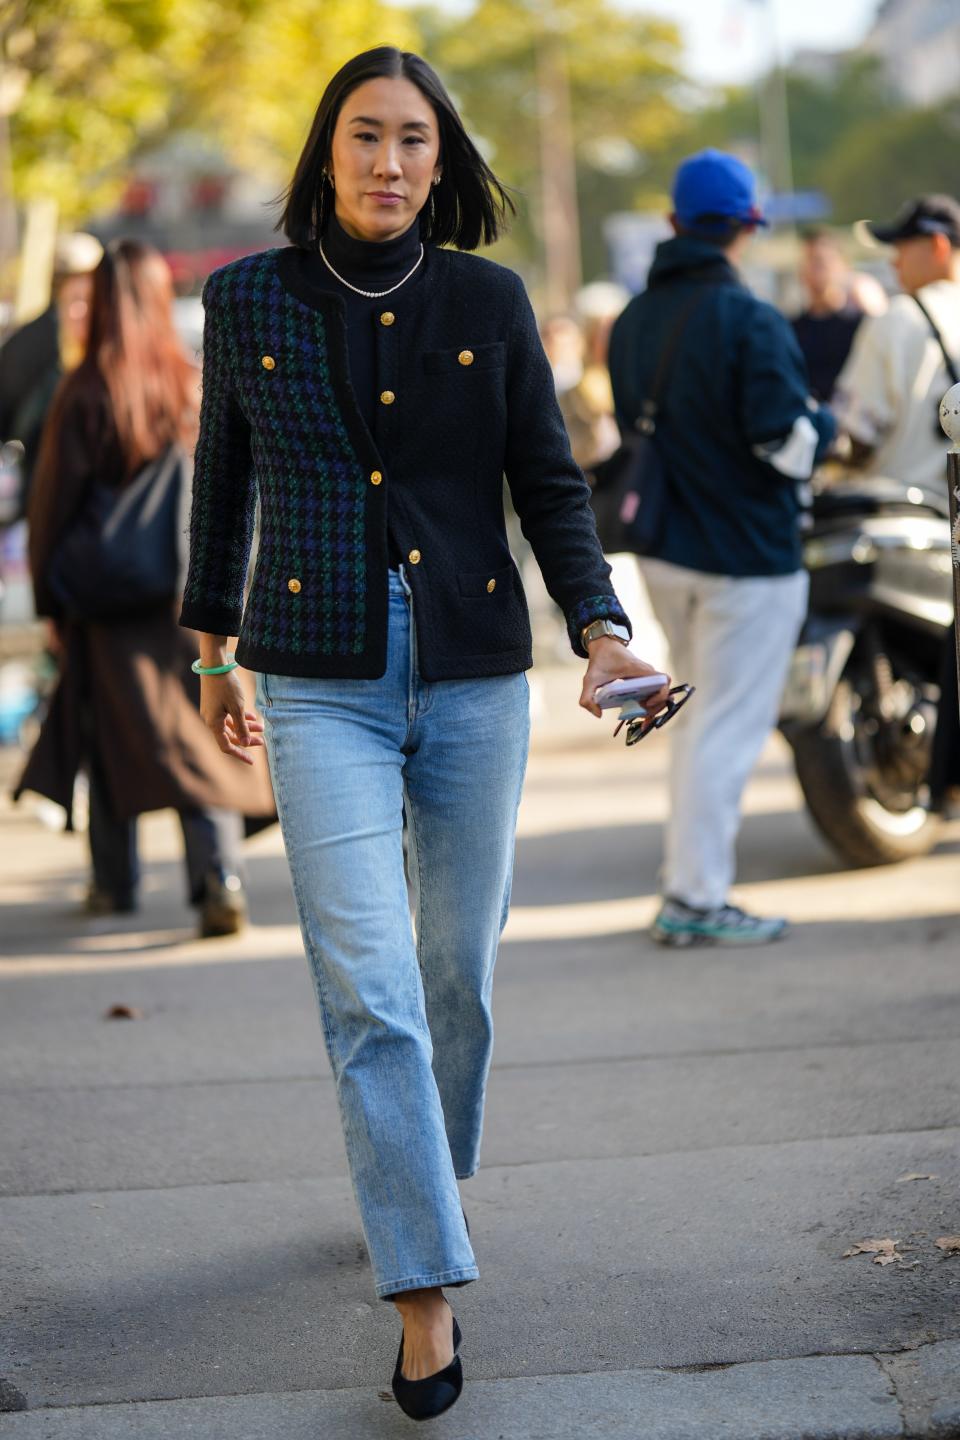 Eva Chen wearing blue jeans and a blue and green blazer with gold buttons.